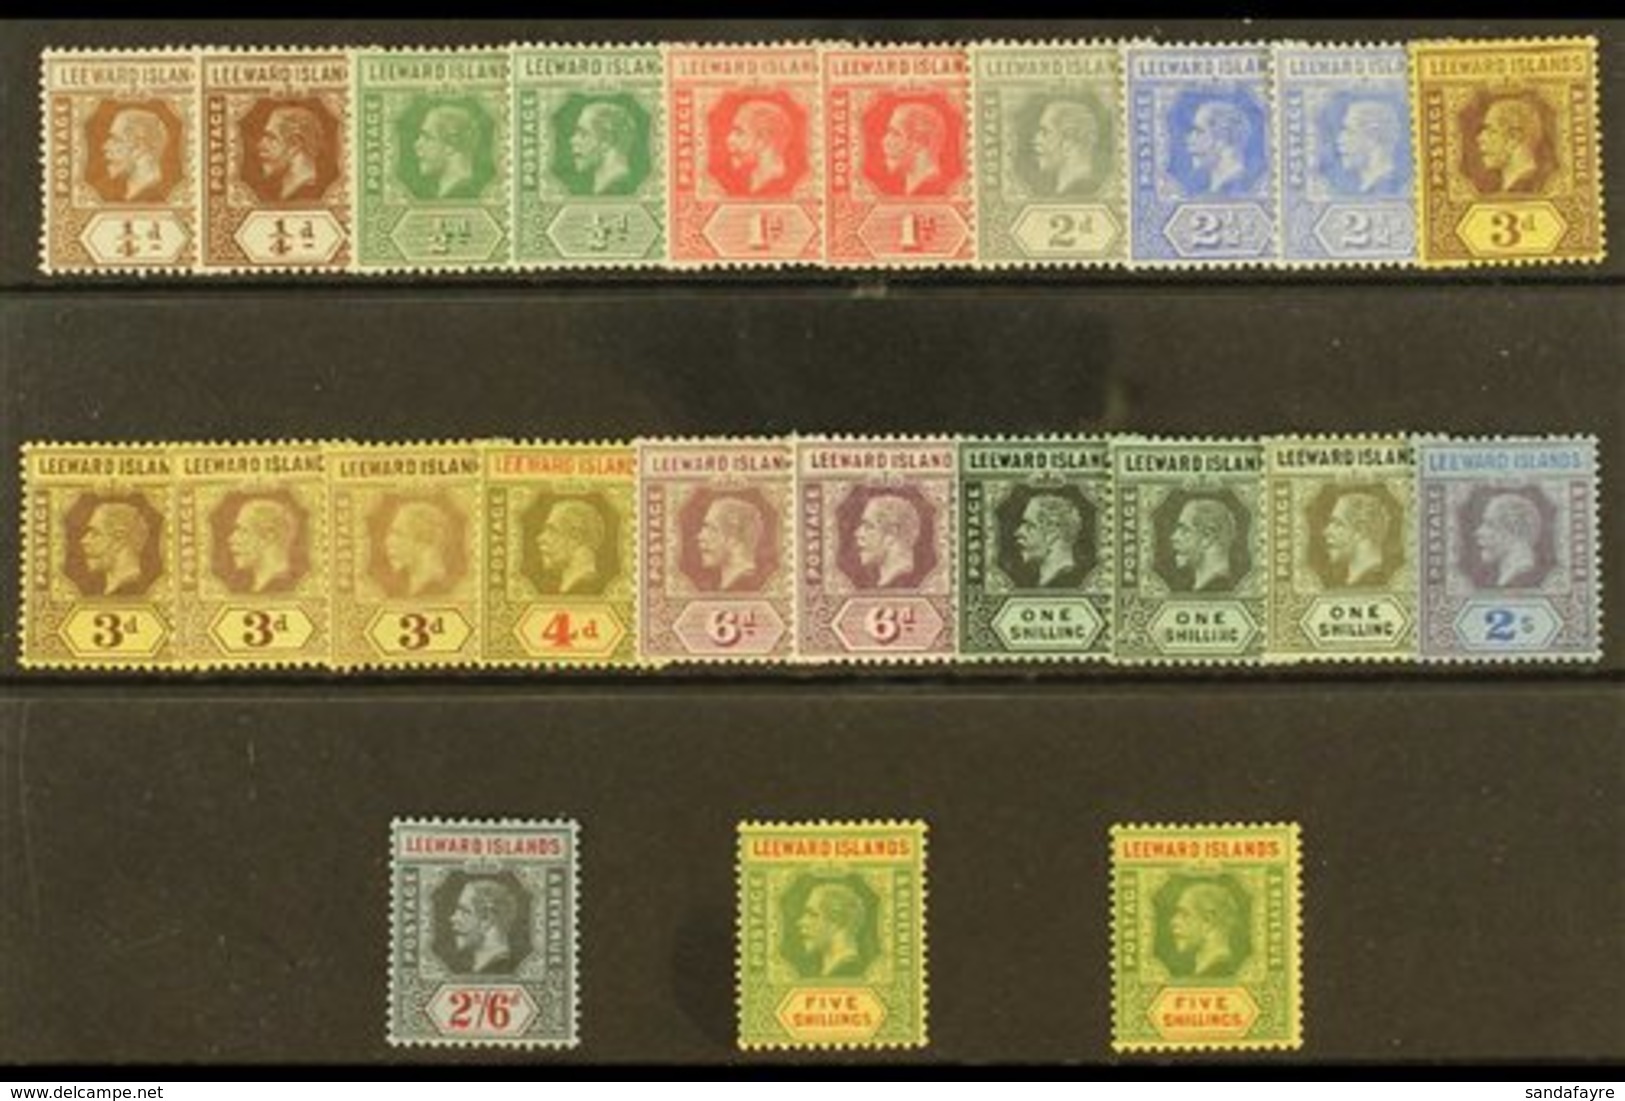 \Y 1912 - 1922 GEO V WMK MCA SELECTION\Y Fine Mint Selection Comprising Complete Set To 5s Plus Additional Shades Includ - Leeward  Islands